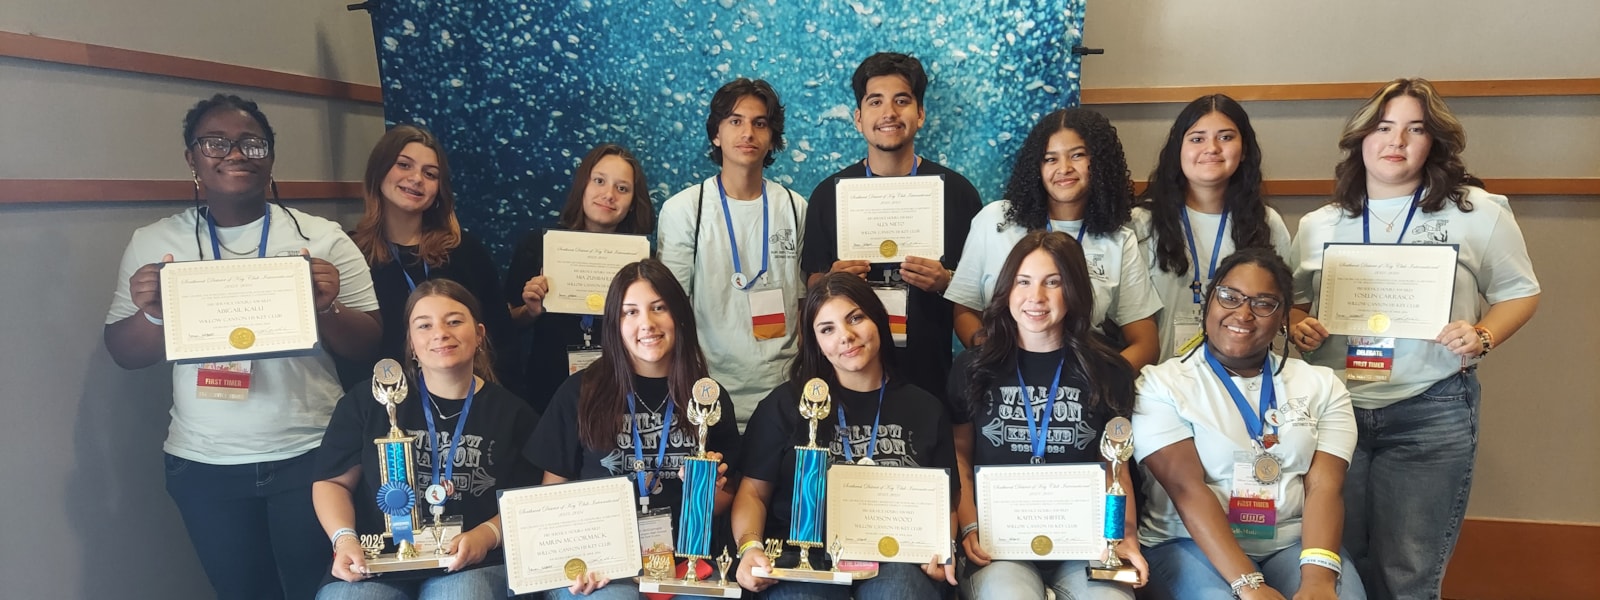 Key Clun members with their trophies